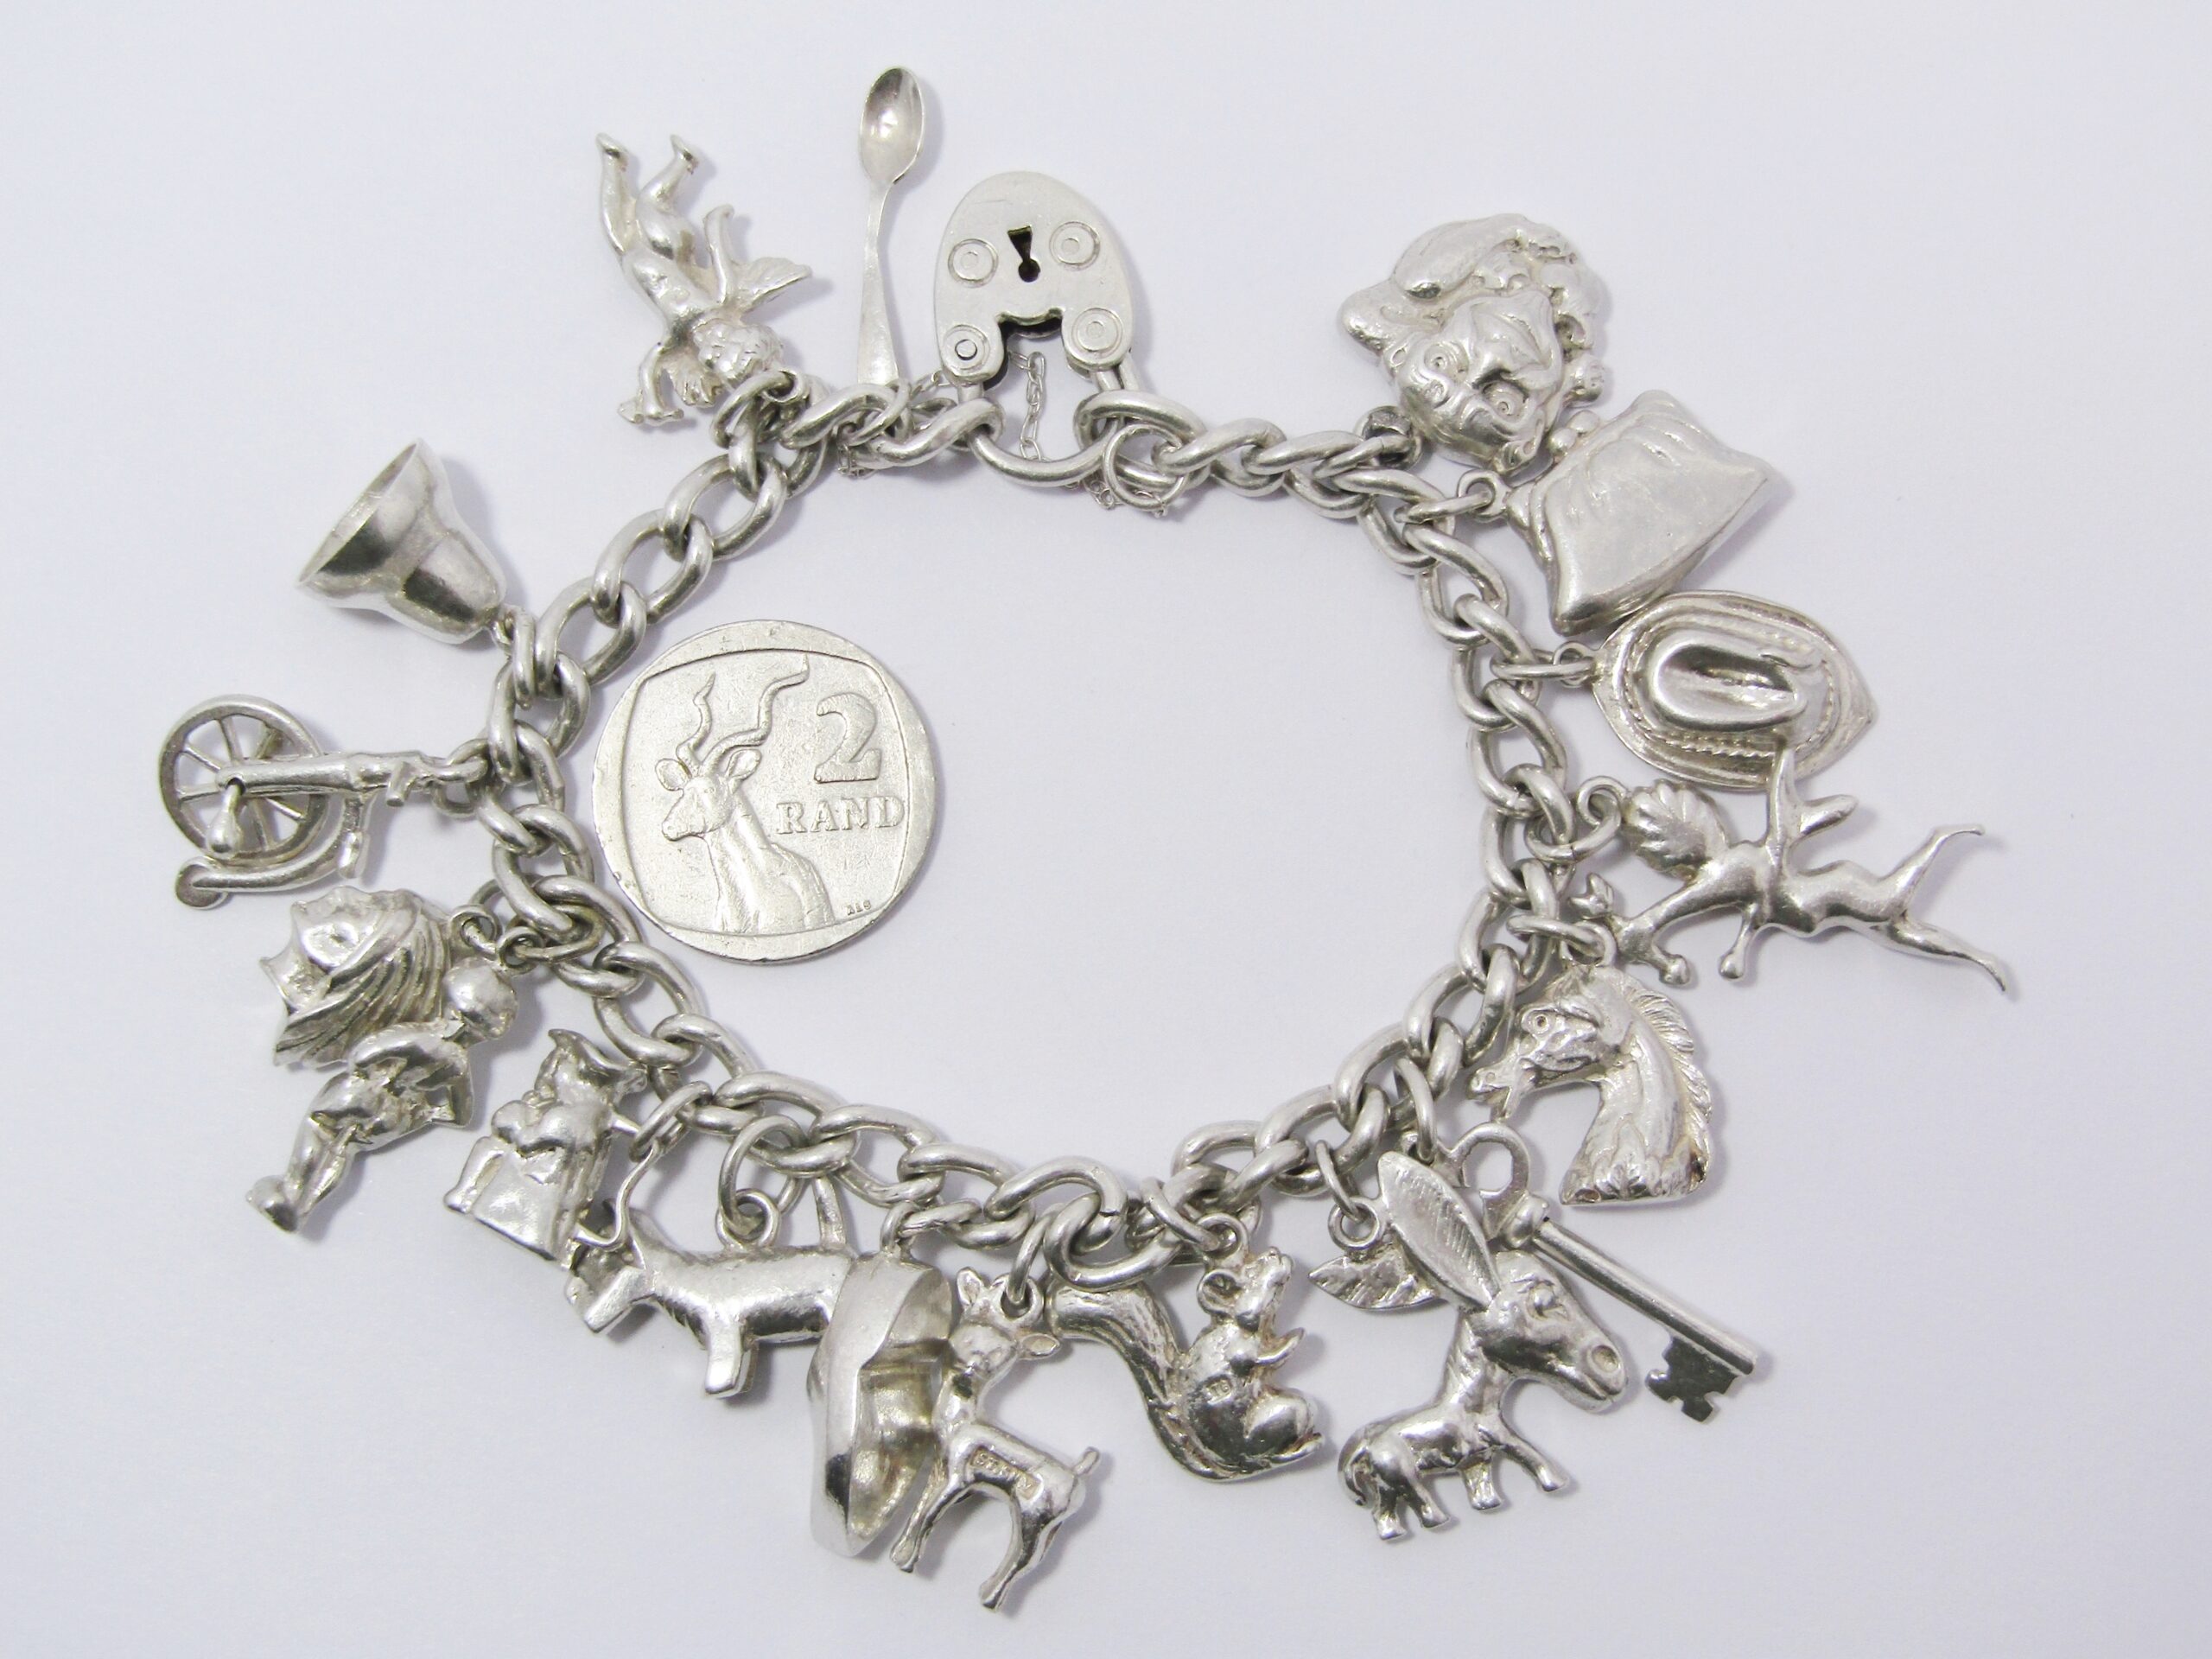 A Gorgeous Vintage Chunky Charm Bracelet in Sterling Silver